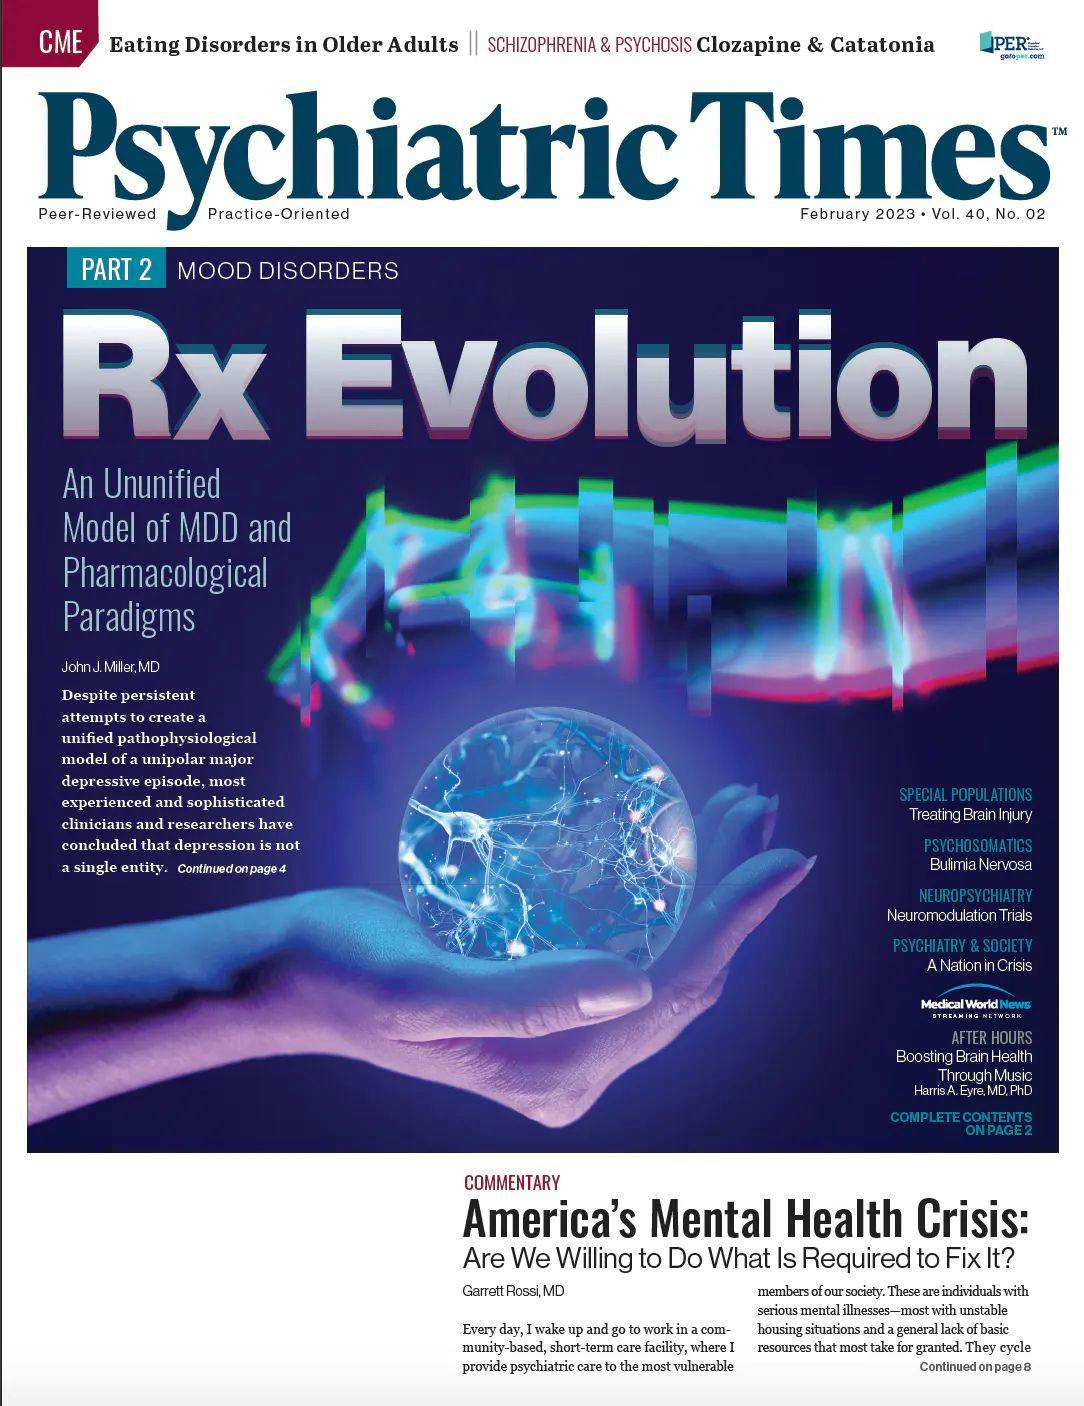 The experts weighed in on a wide variety of psychiatric issues for the February 2023 issue of Psychiatric Times.